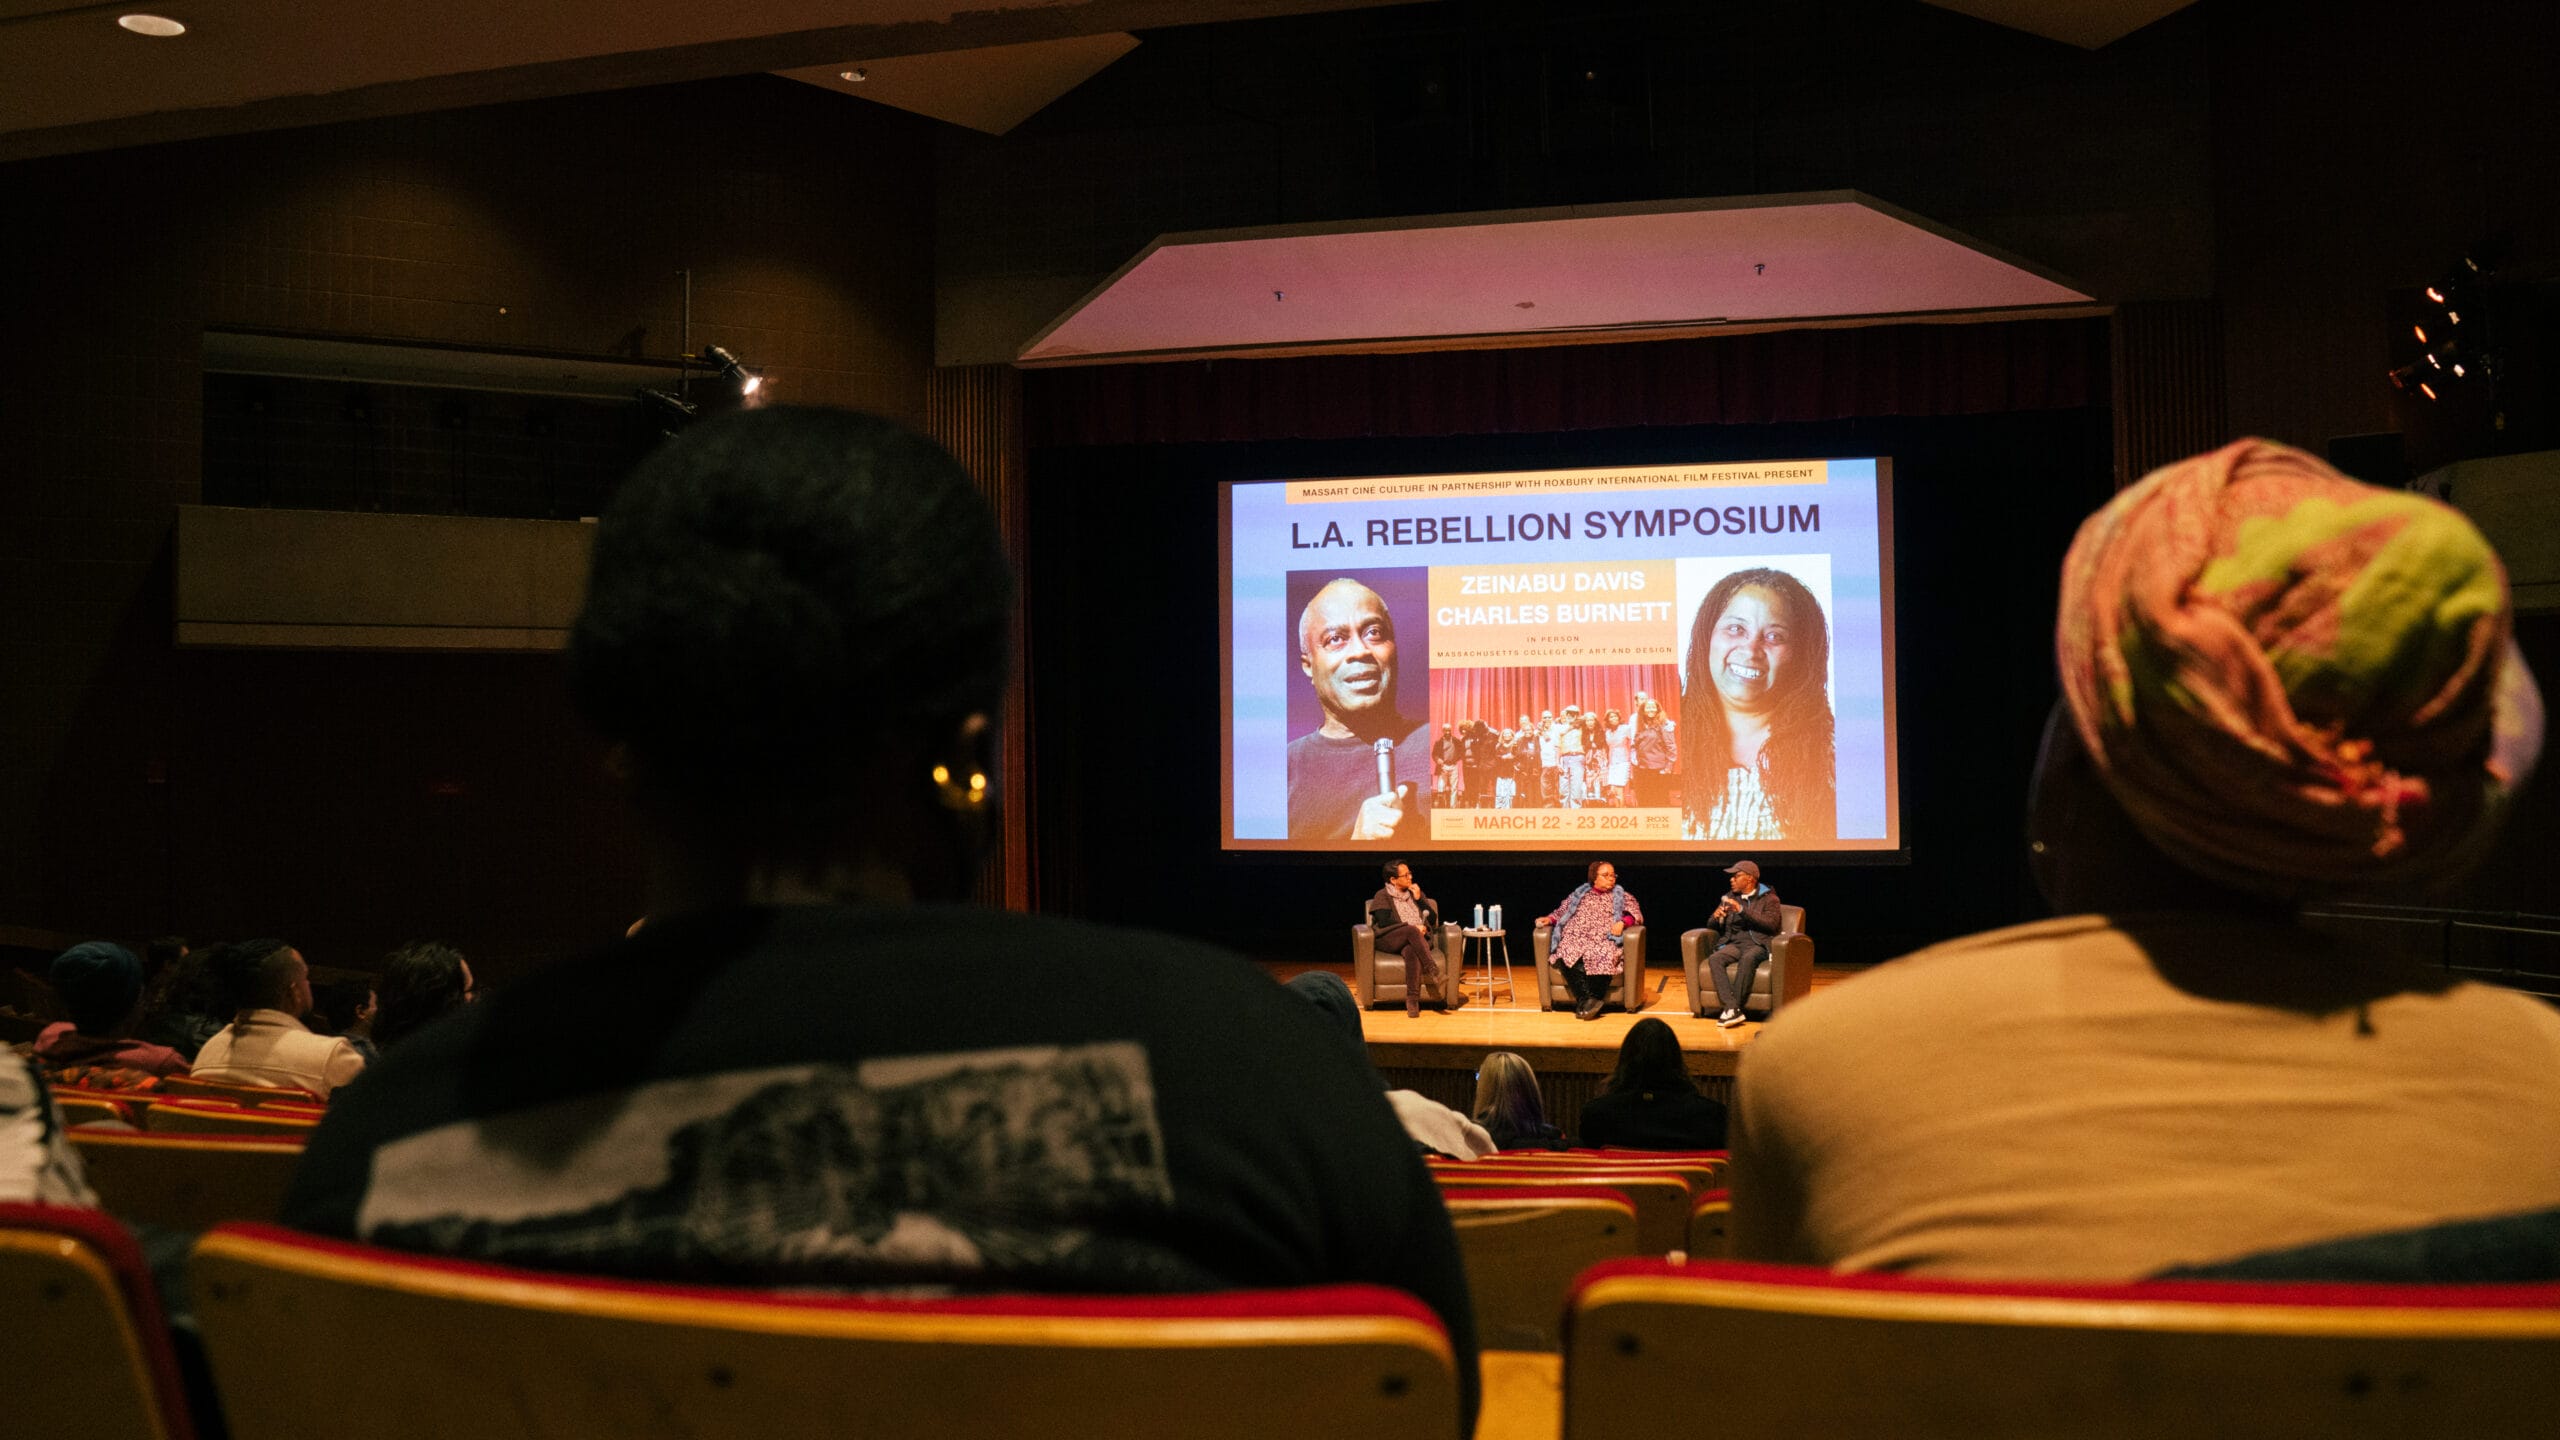 People sitting in an auditorium watching a panel of speakers with words "L.A. Rebellion Symposium" on the screen